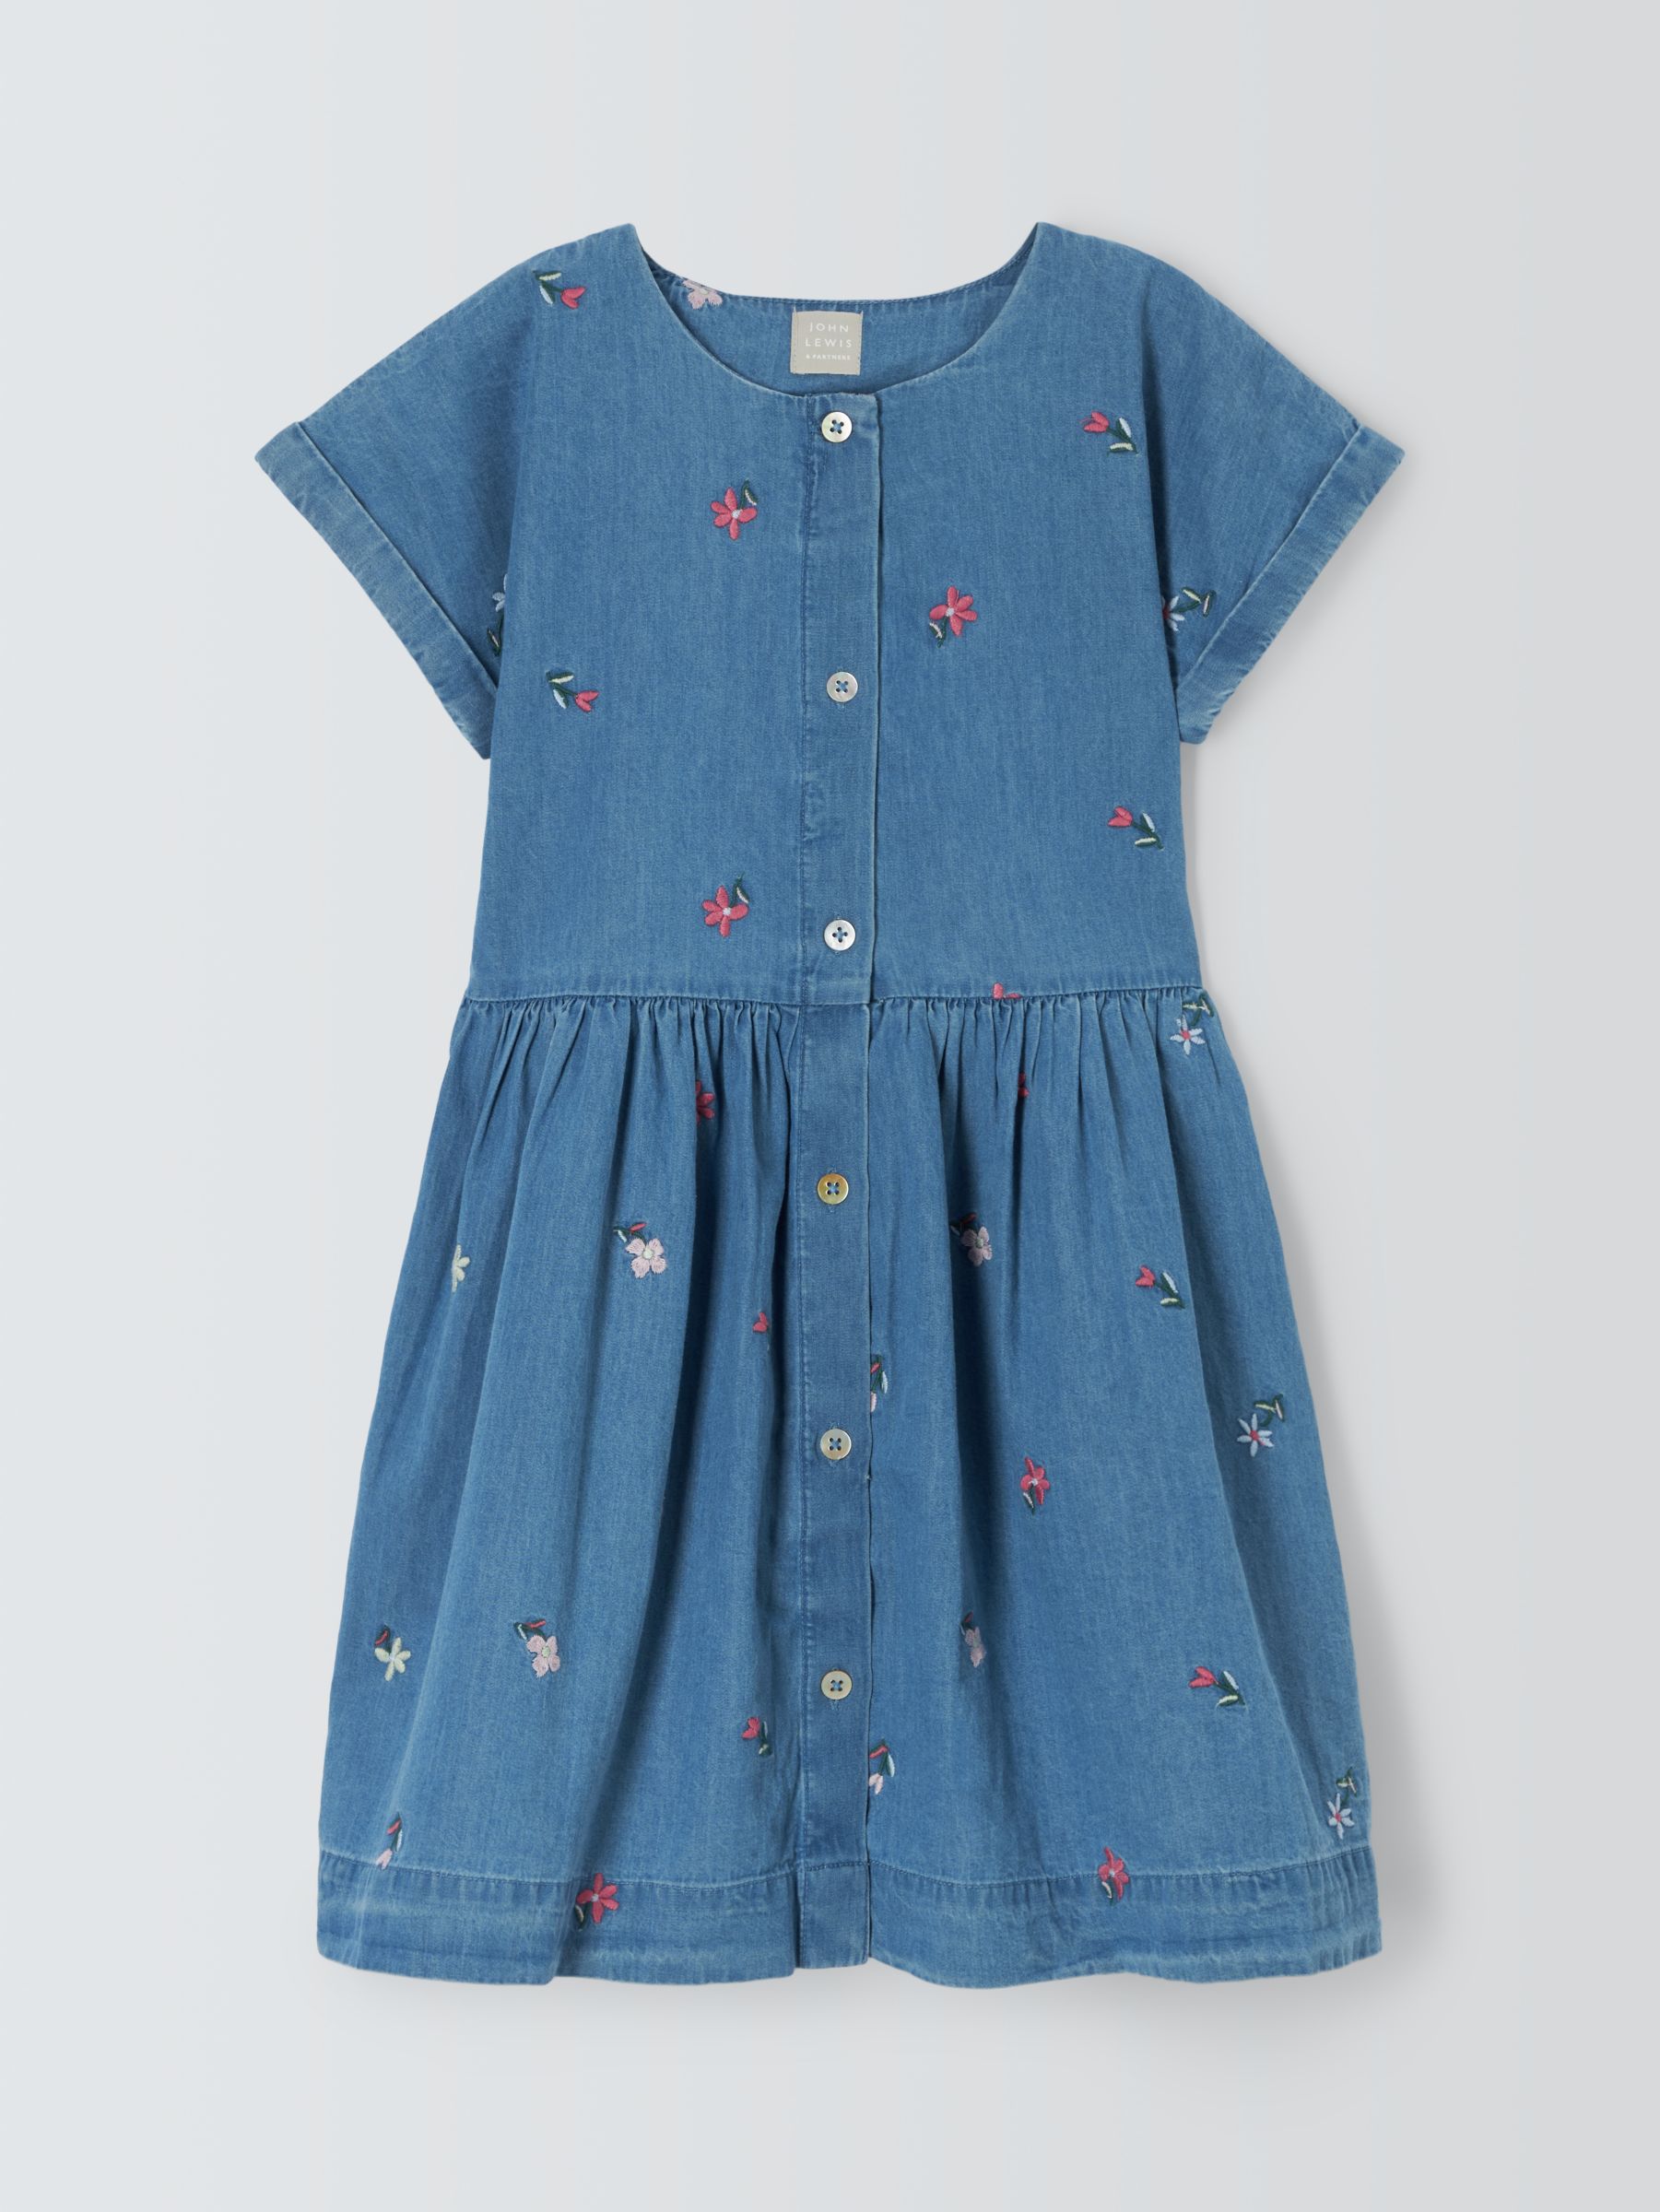 John Lewis Kids' Chambray Embroidered Flowers Dress, Blue, 7 years